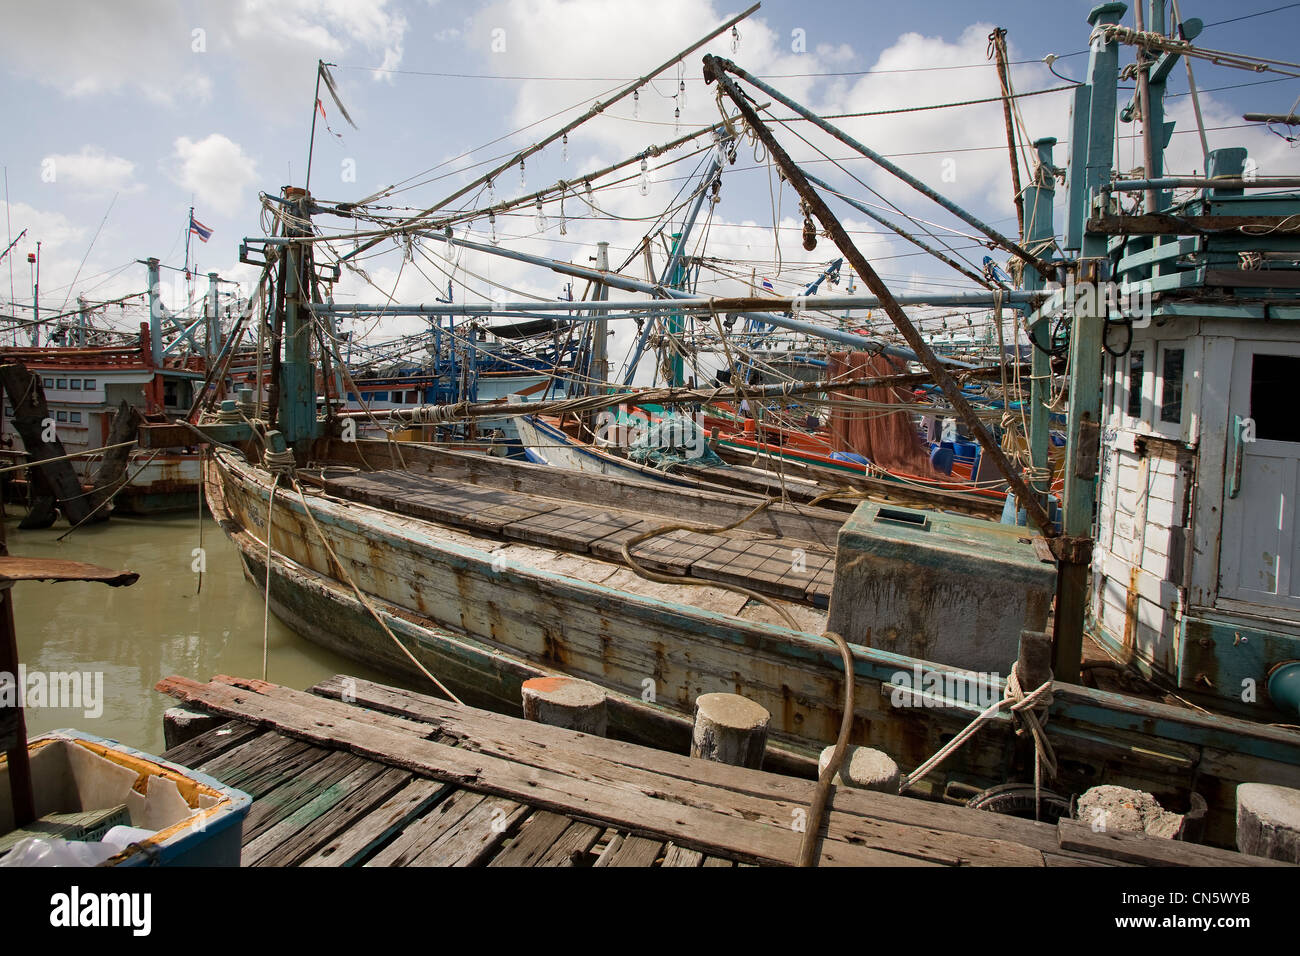 Fishing boats tied up at Lamsai Community, Songkhla, Thailand, Jan 2008 Photo by Mike Goldwater Stock Photo